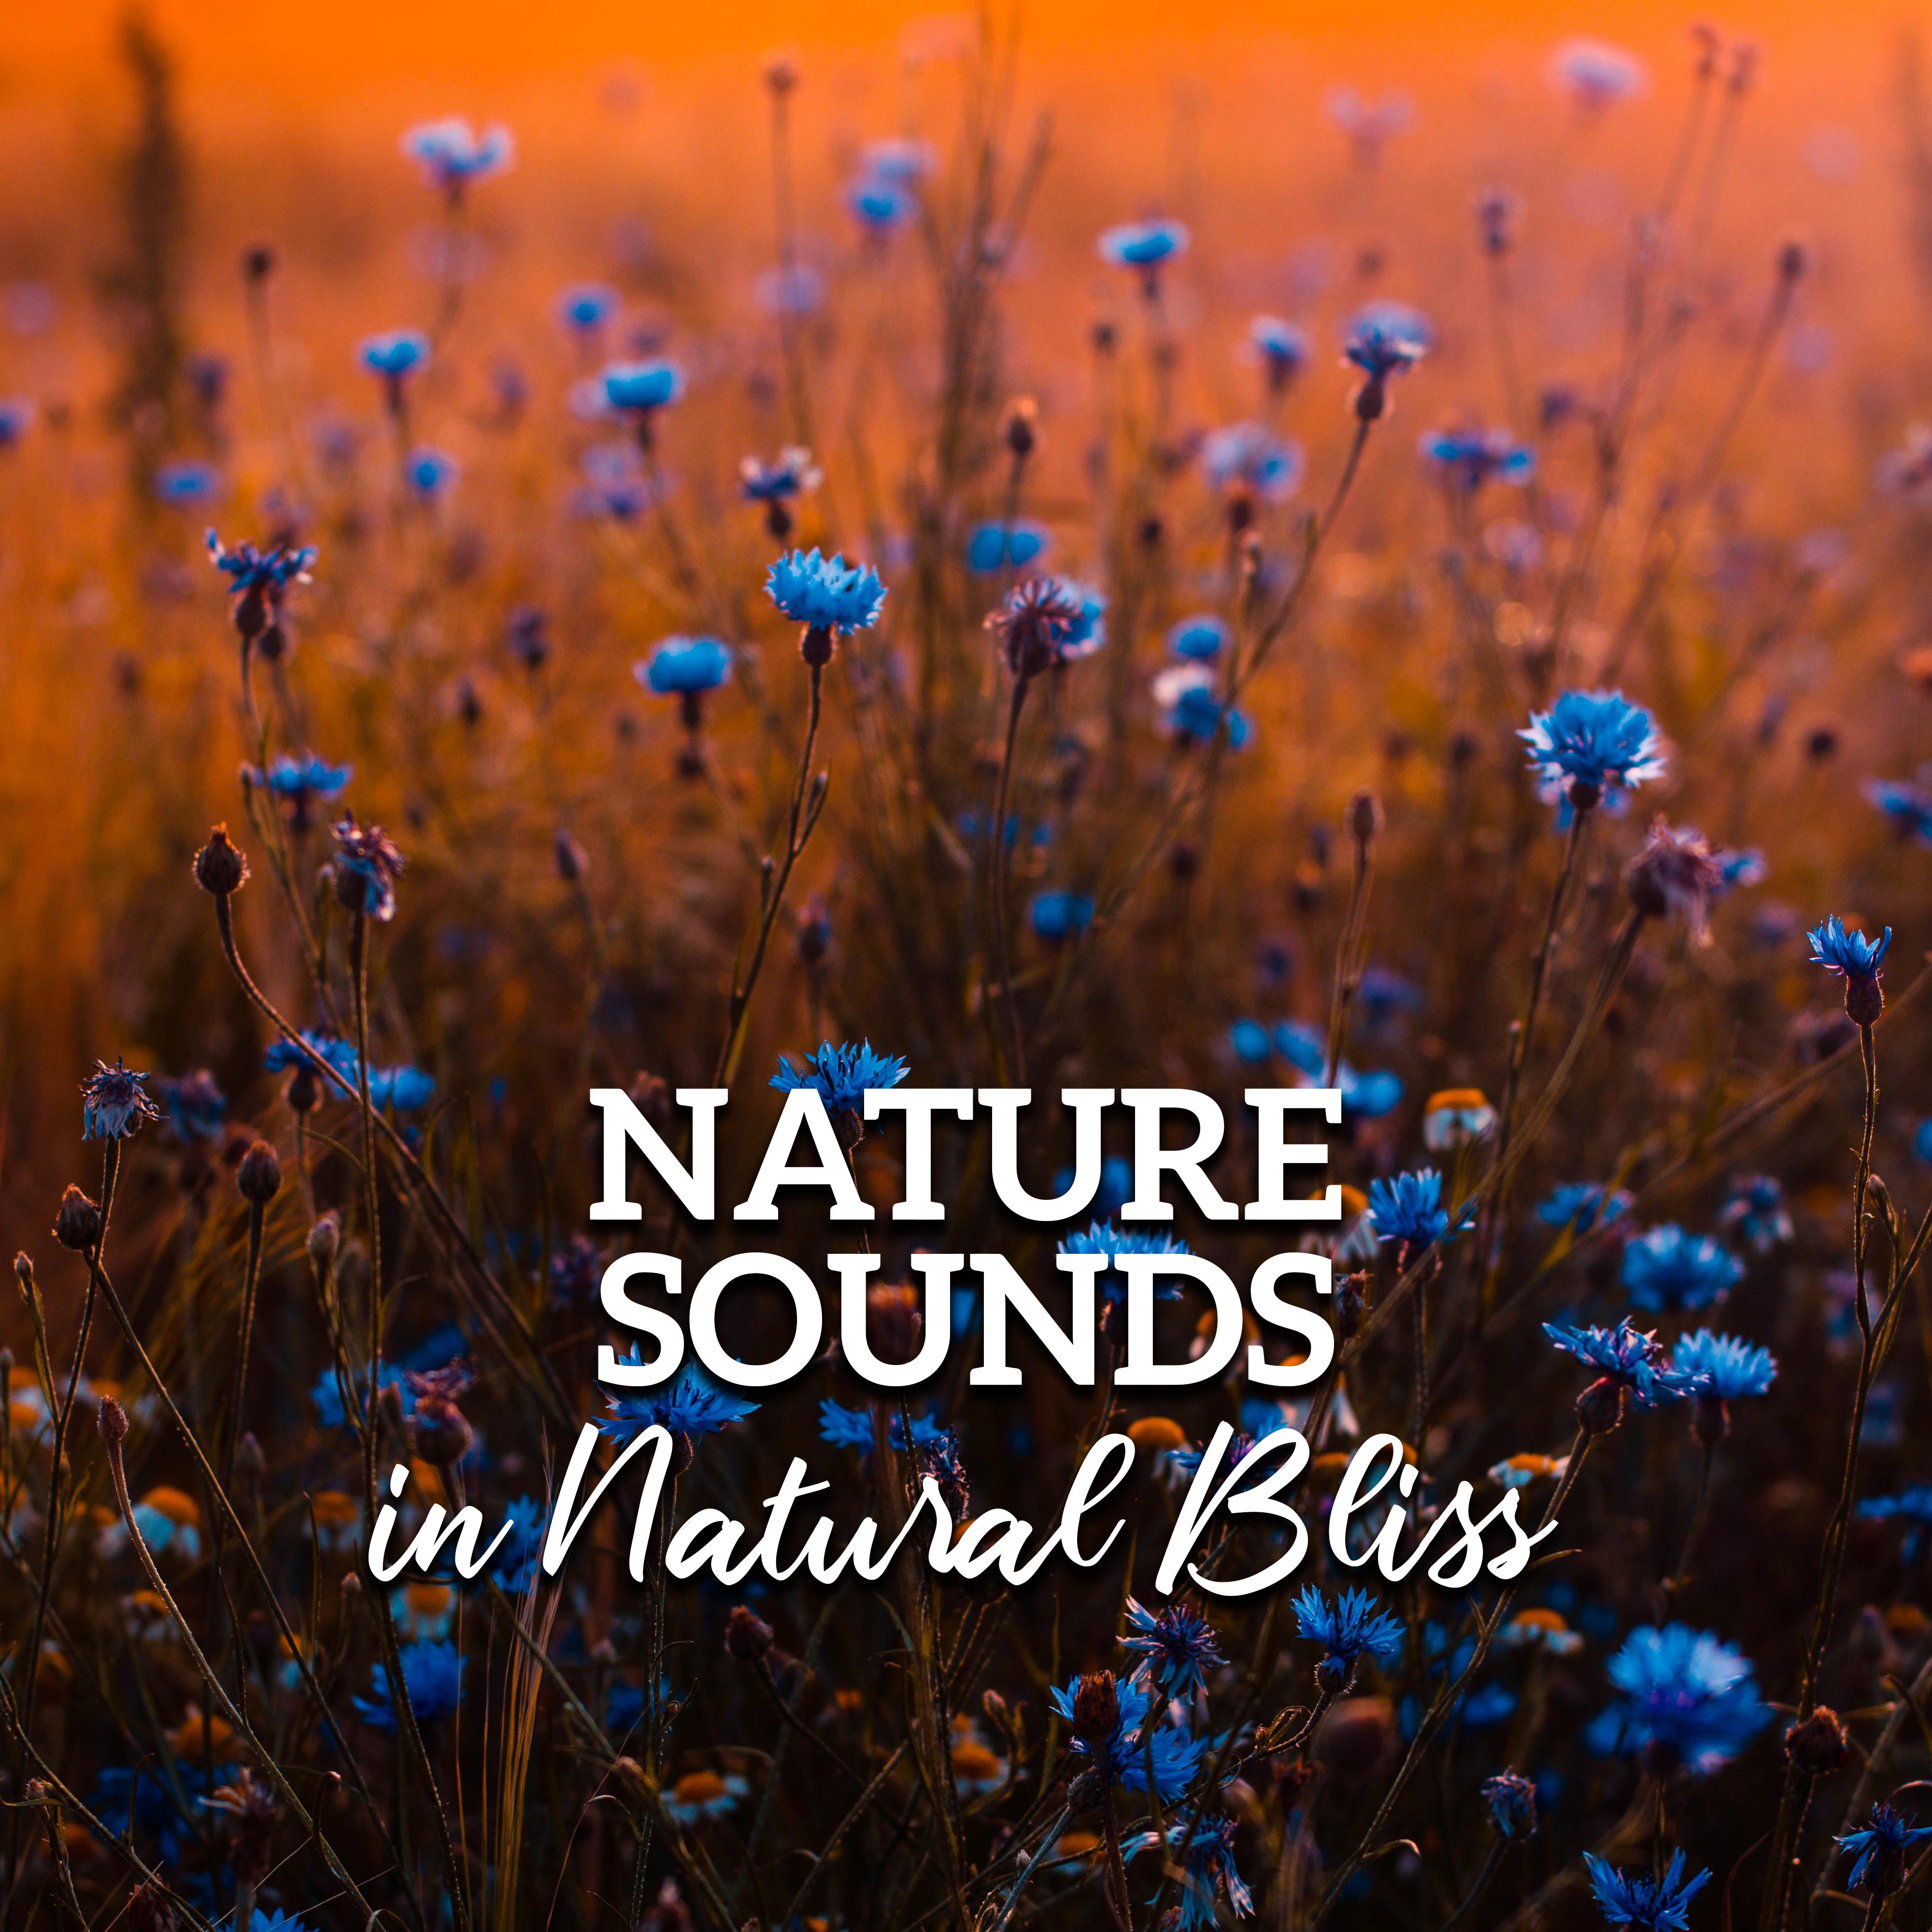 Nature Sounds in Natural Bliss  Pure Relaxation, Reduce Stress, 15 Sounds of Nature, Healing Therapy, Zen Serenity, Lounge Music